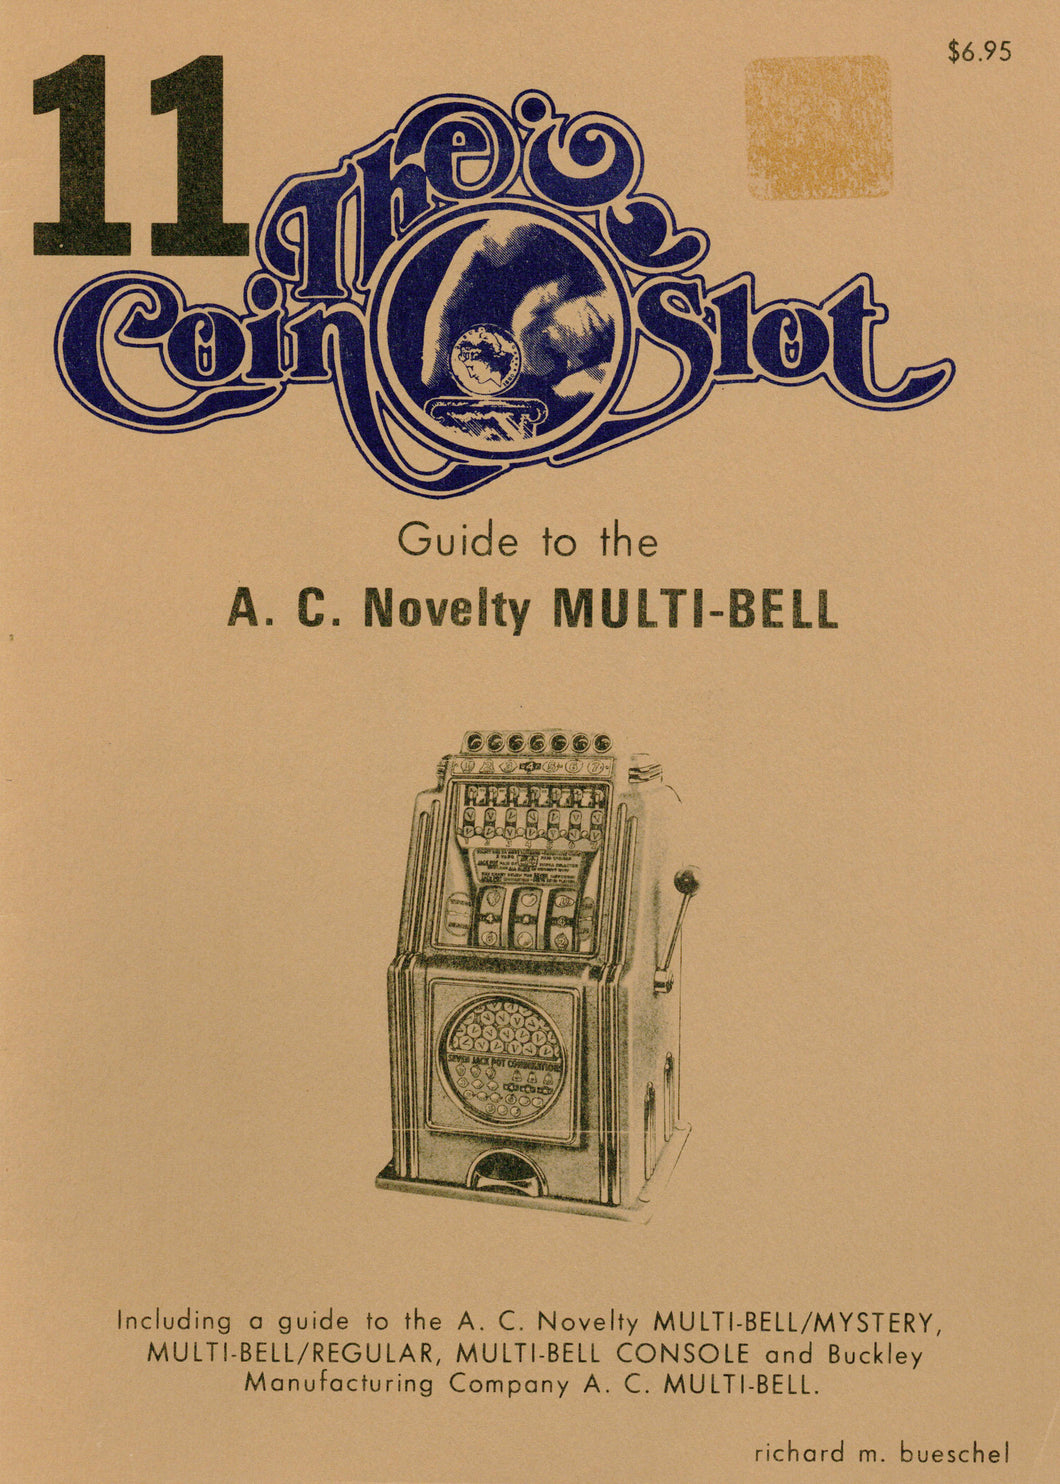 Coin Slot #11. Guide to the A.C. Novelty Multi-Bell